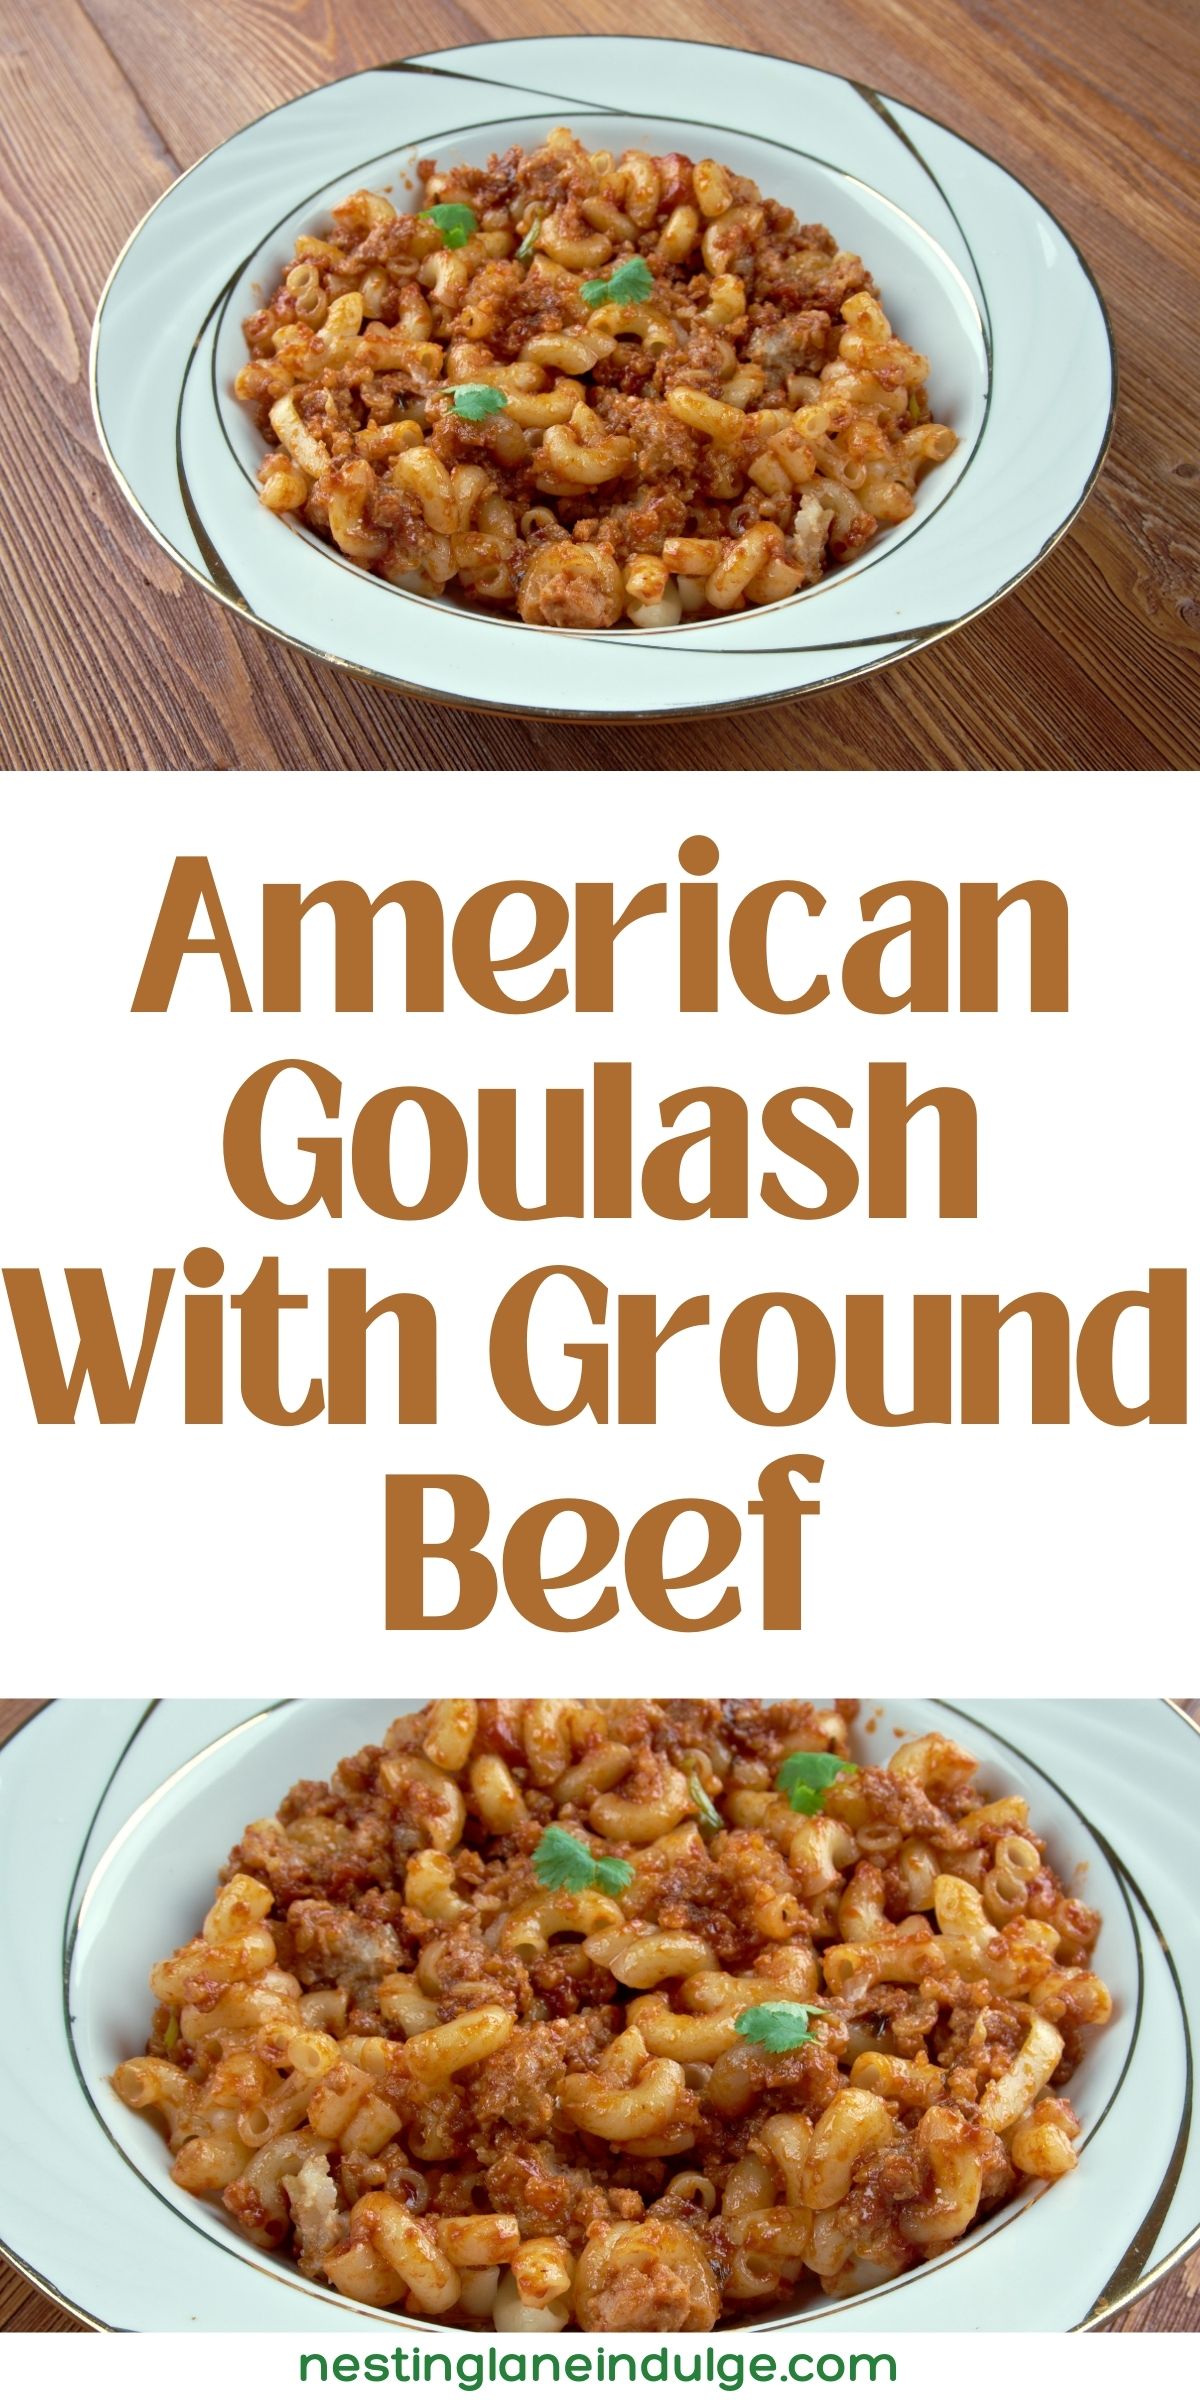 American Goulash with Ground Beef Graphic.